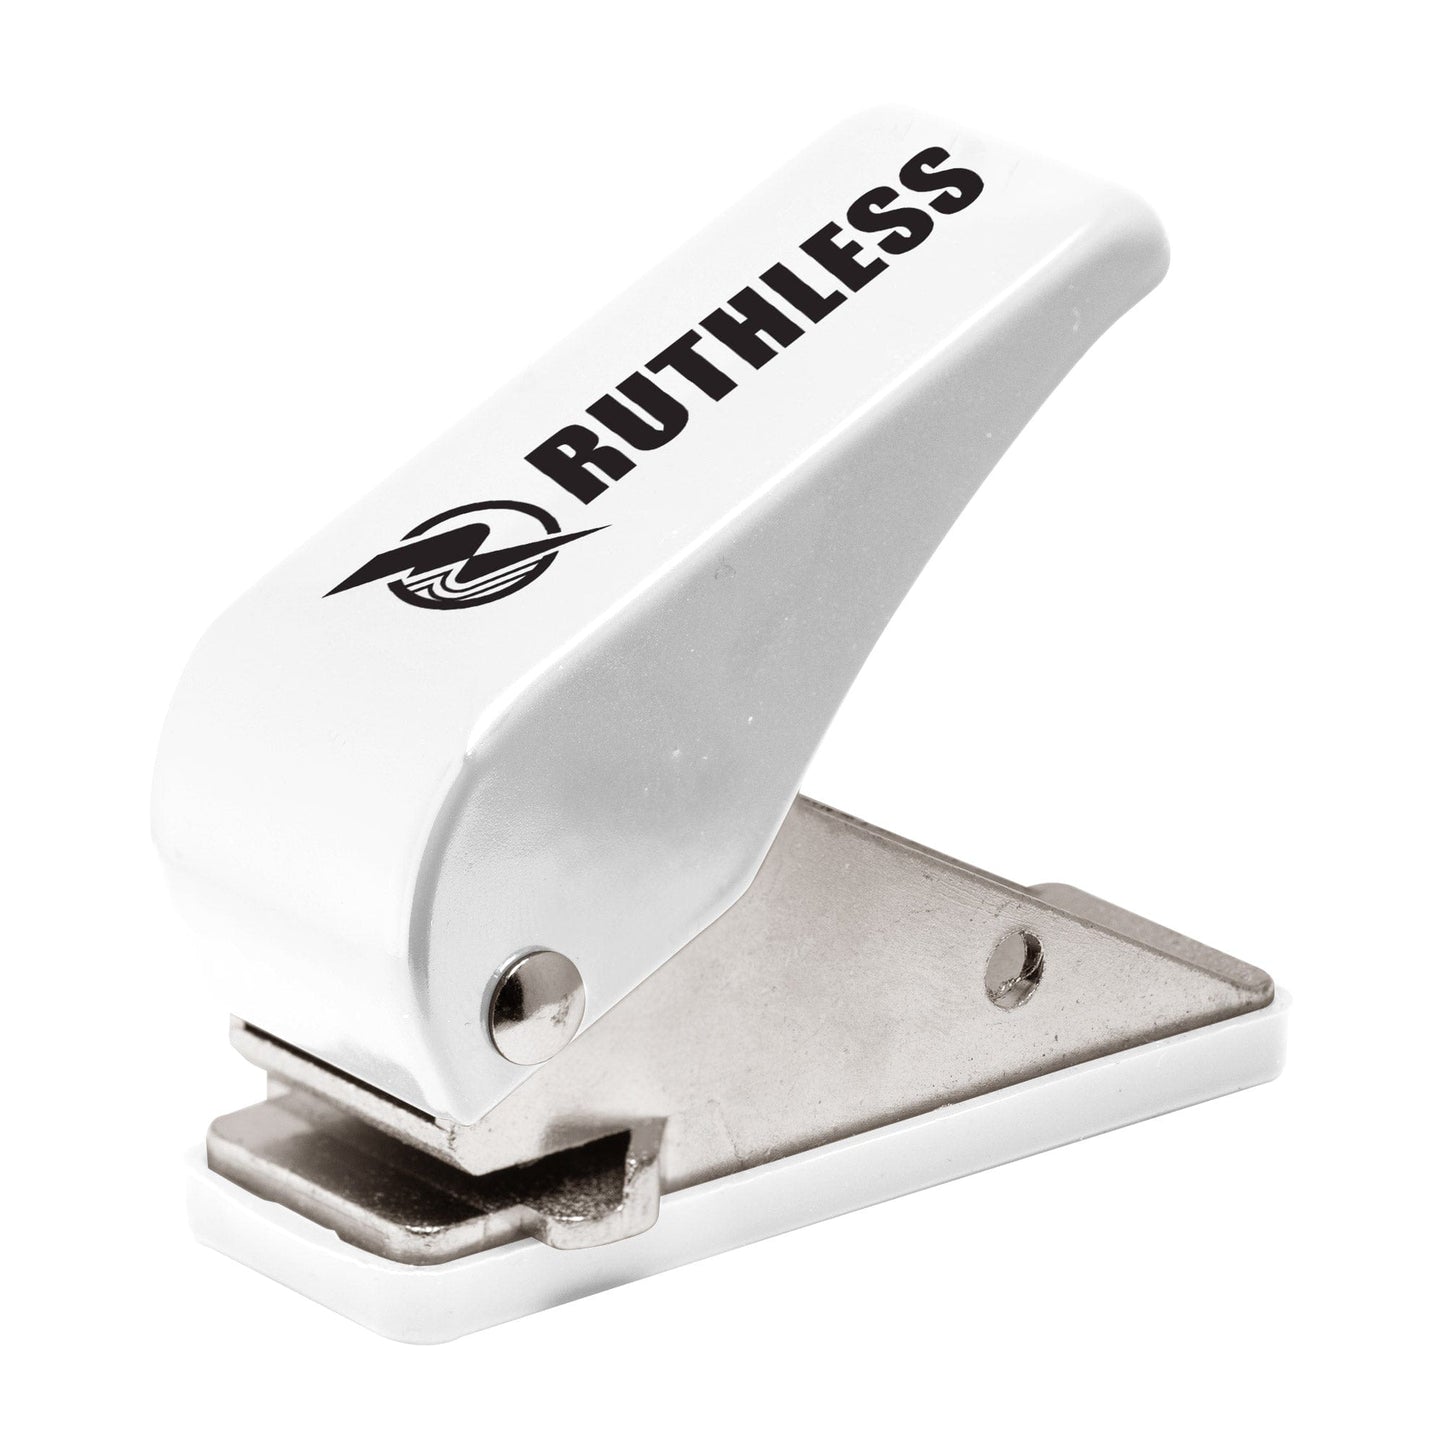 Ruthless Dart Flight Punch - Pocket Size - Easy to Use Tool White